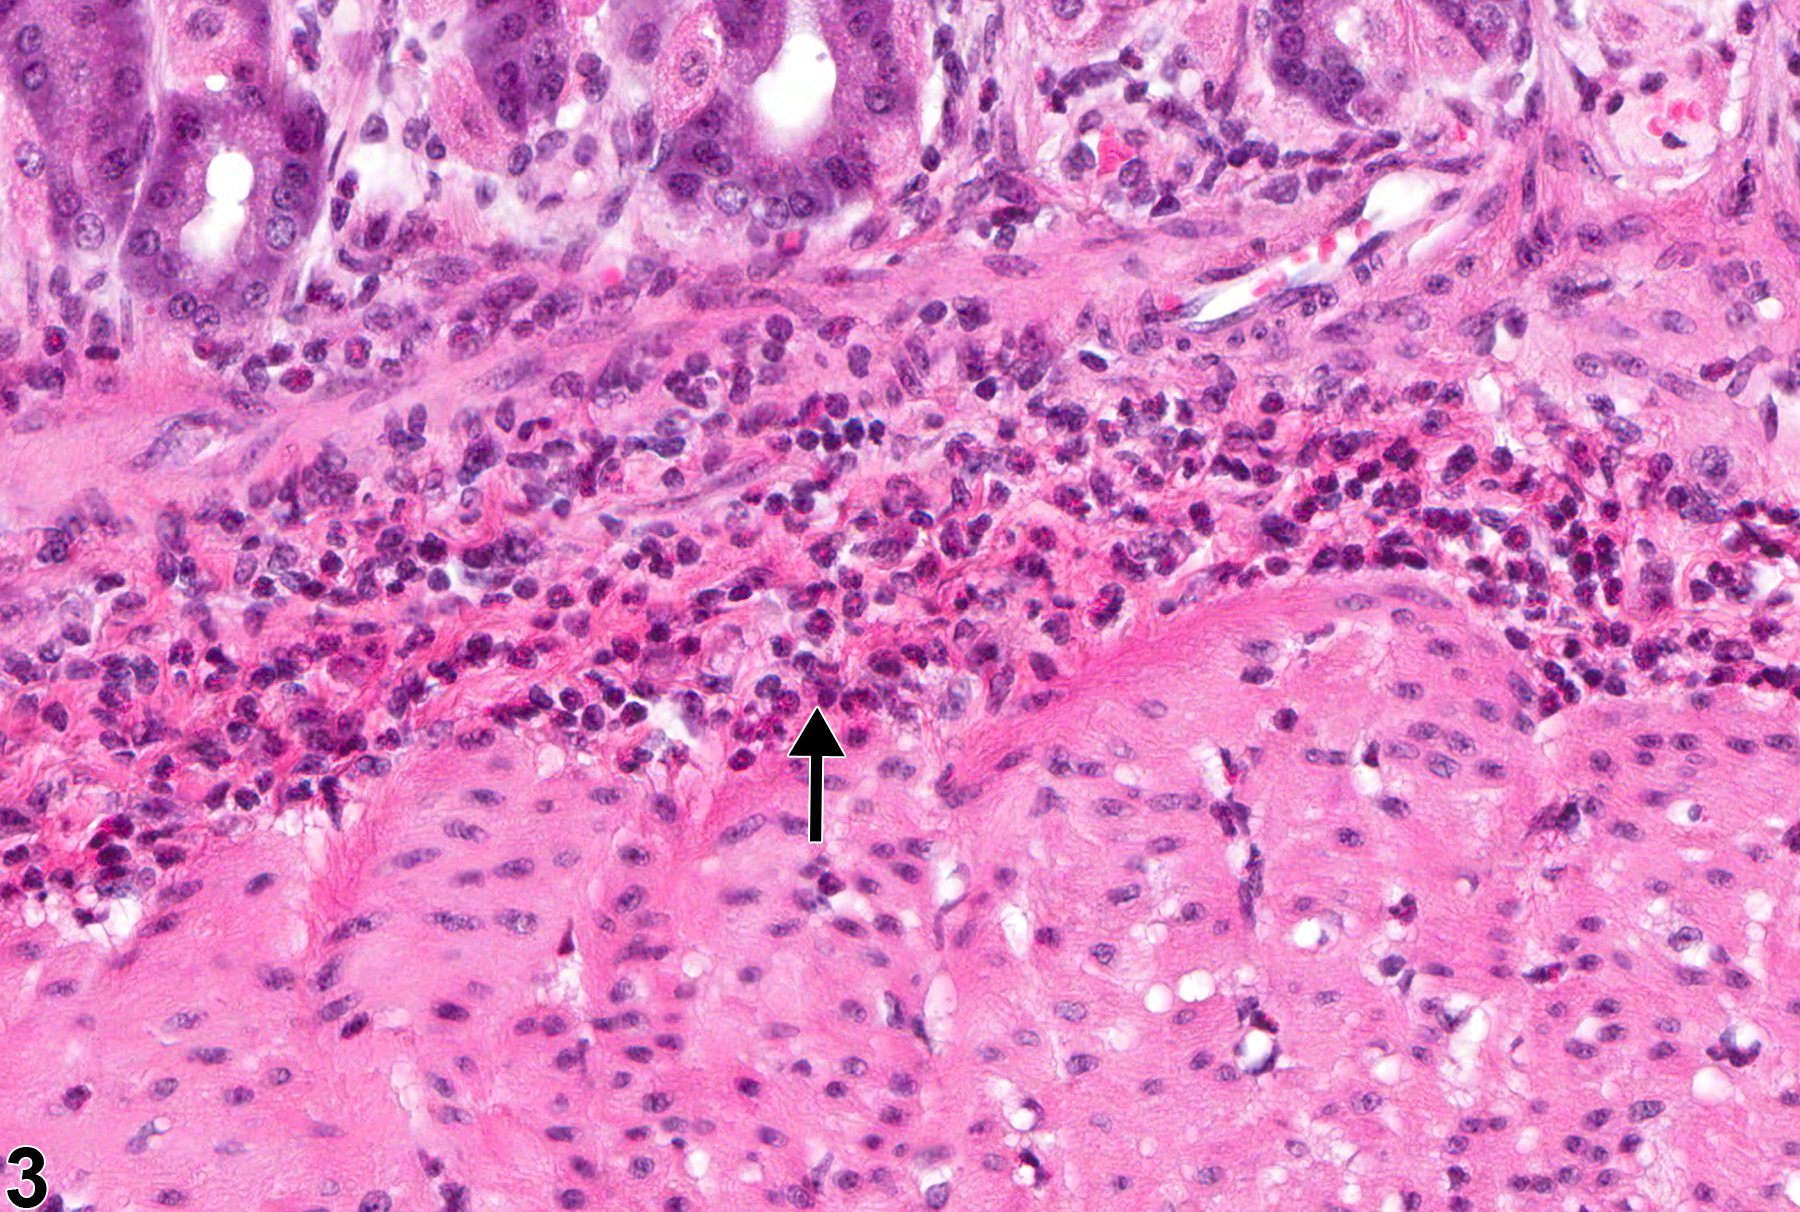 Image of infiltration cellular  in the glandular stomach from a female B6C3F1 mouse in a subchronic study